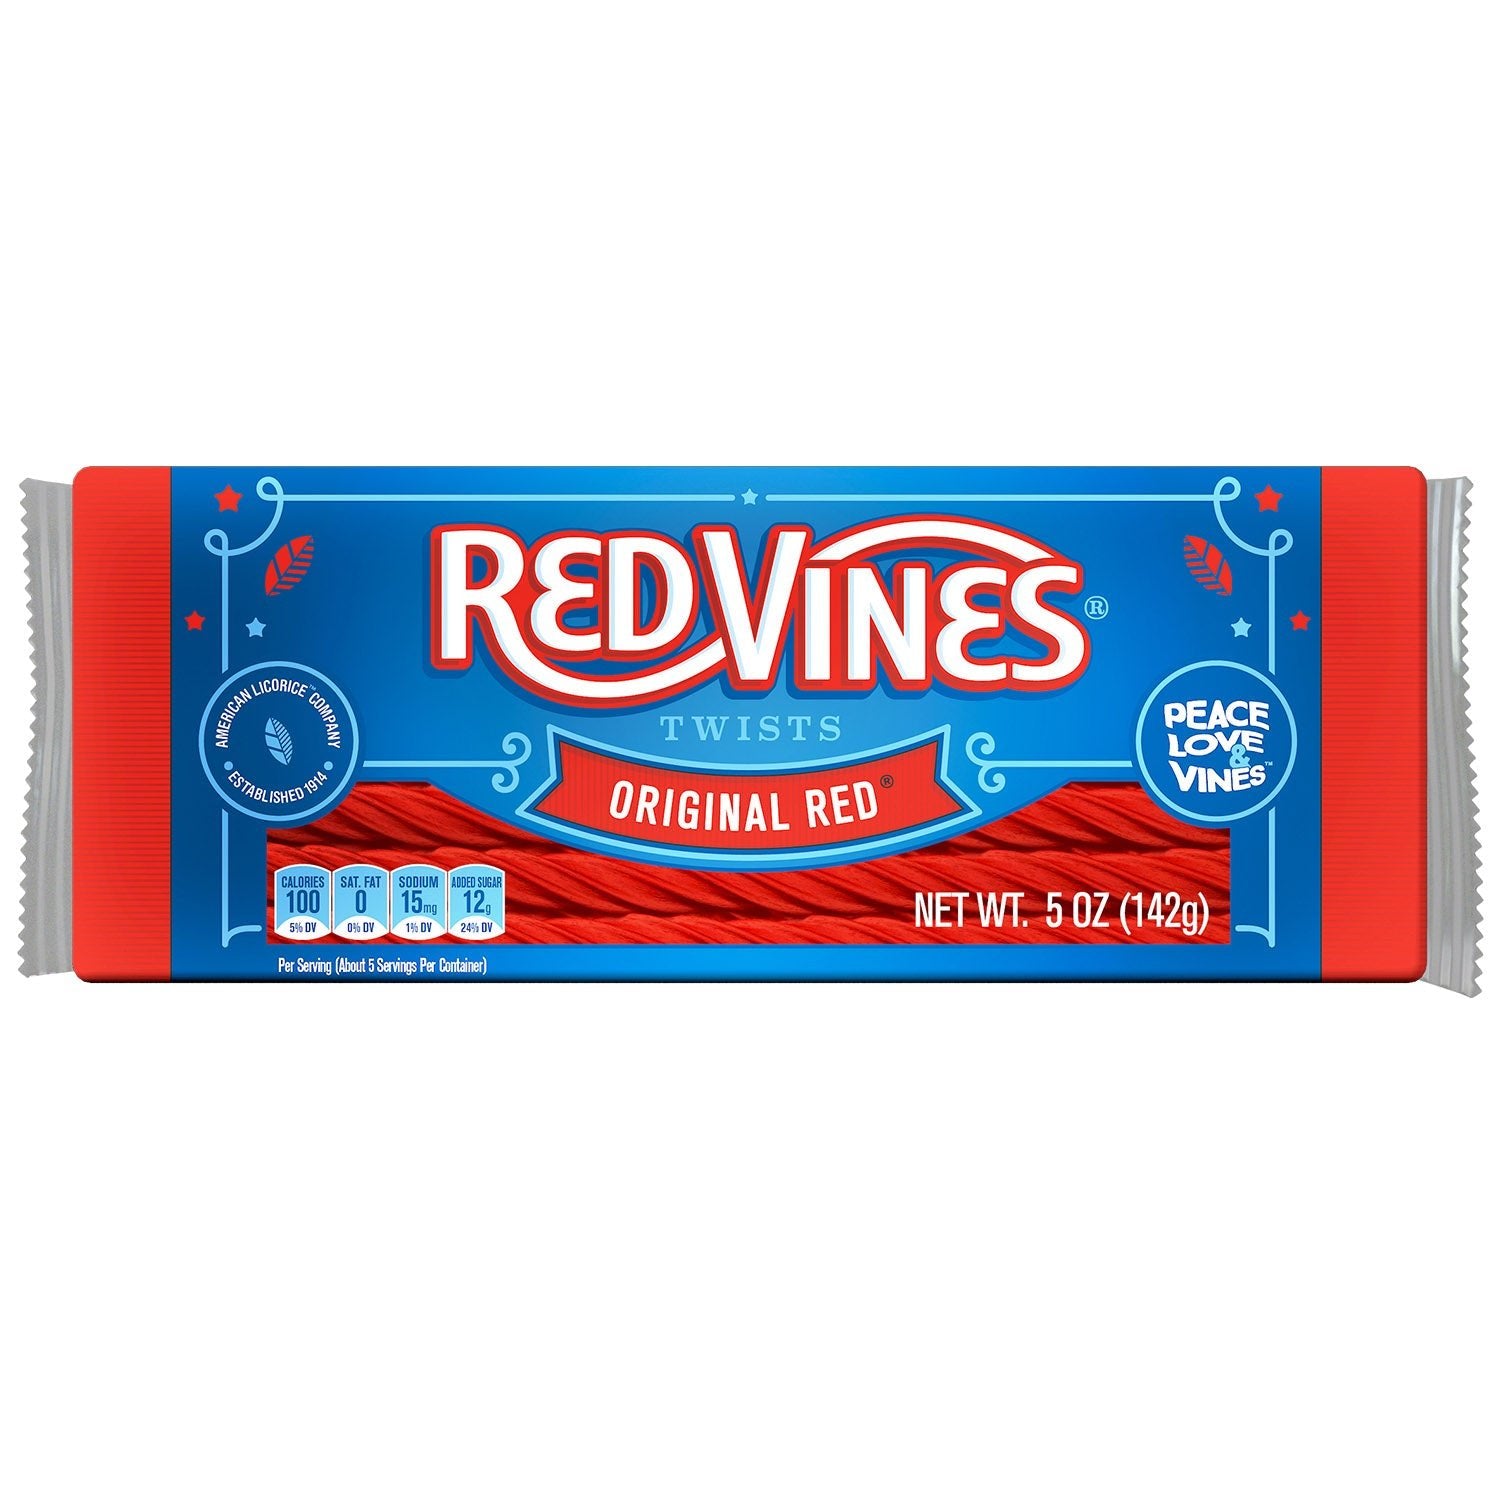 Front of 5oz Red Vines Original Red Licorice Twists Tray